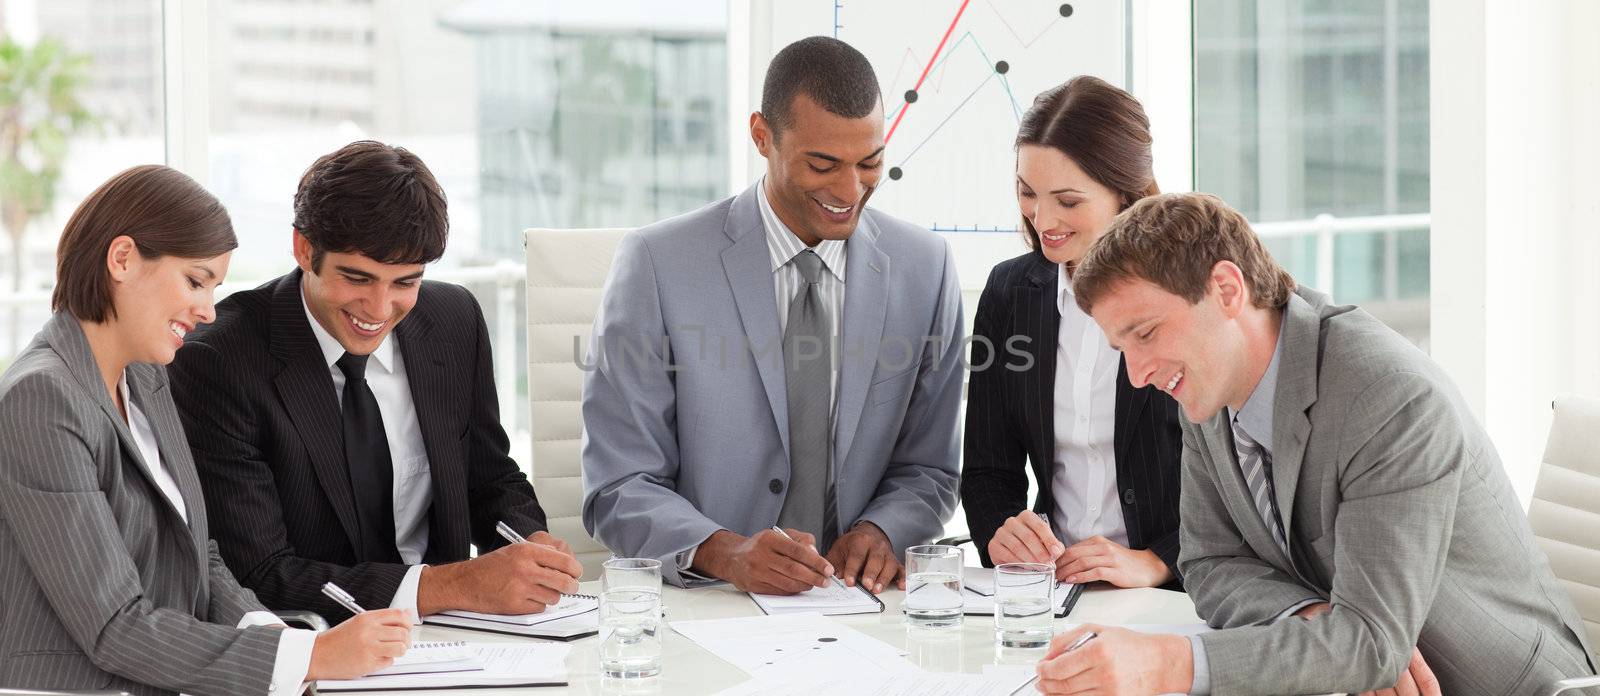 A diverse business group studying a budget plan in a meeting